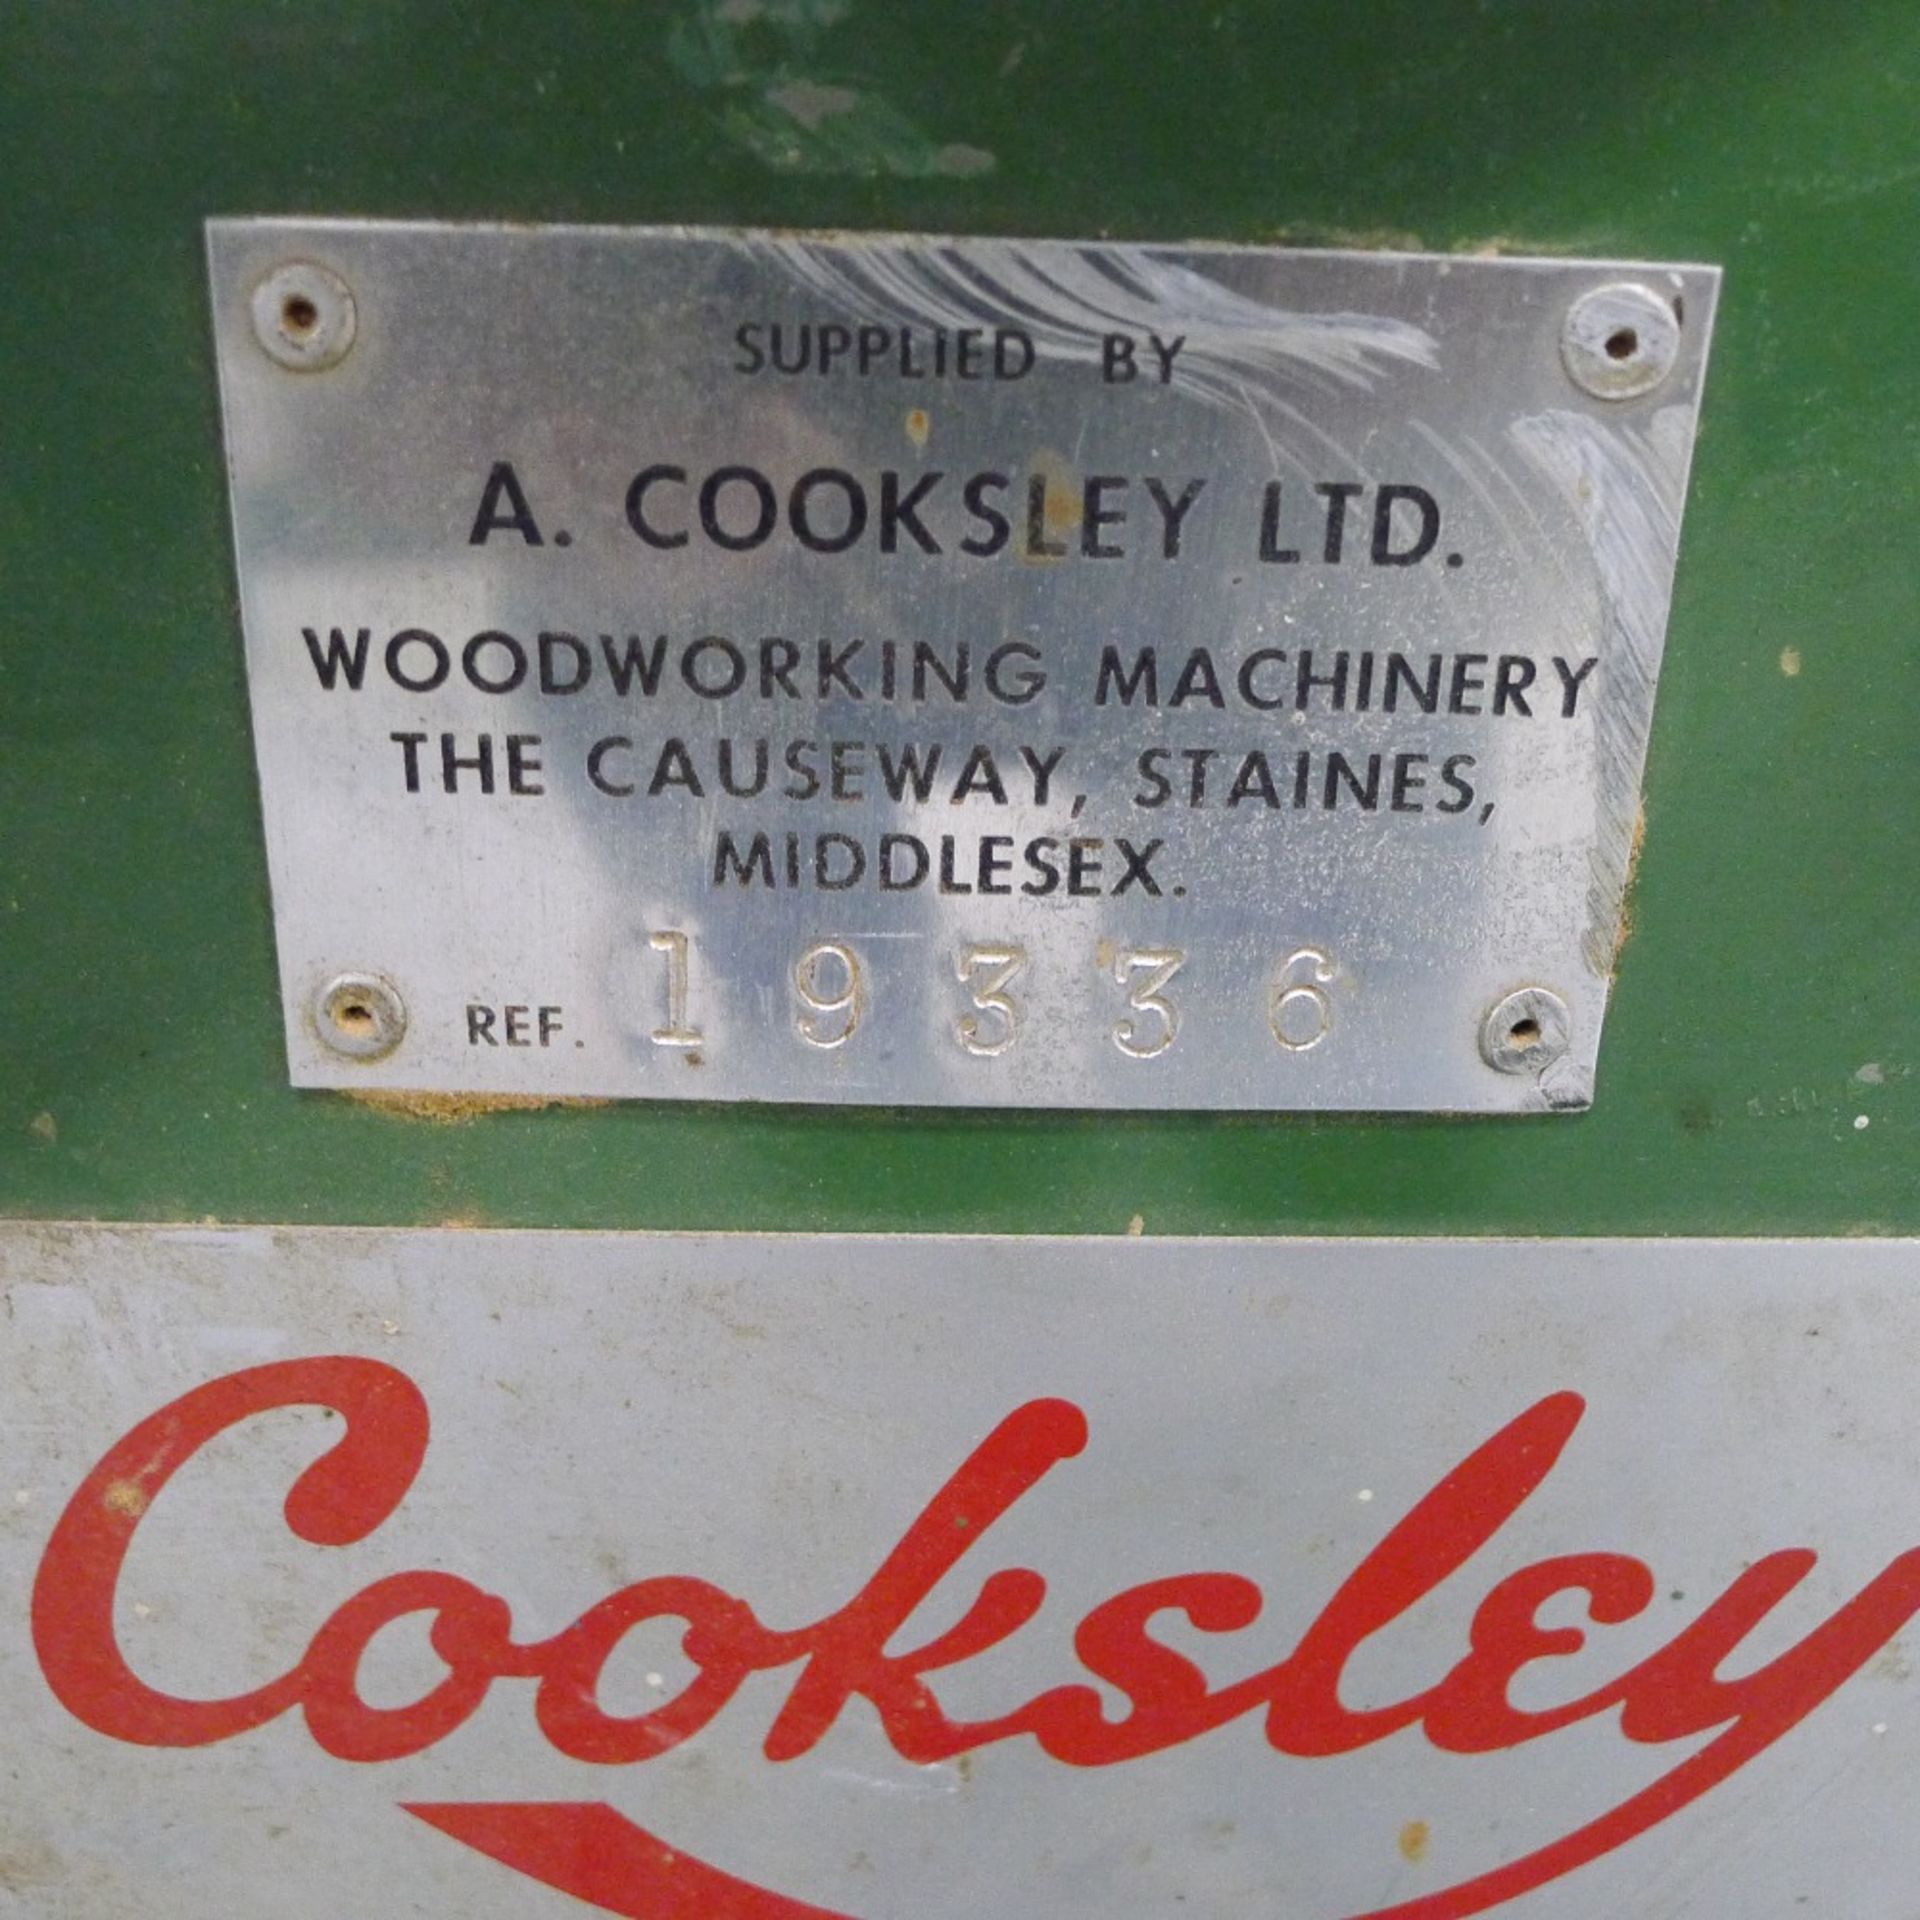 1 spindle moulder by Cooksley ref. 19336, 3ph supplied with a small quantity of tooling, a roller - Image 4 of 7